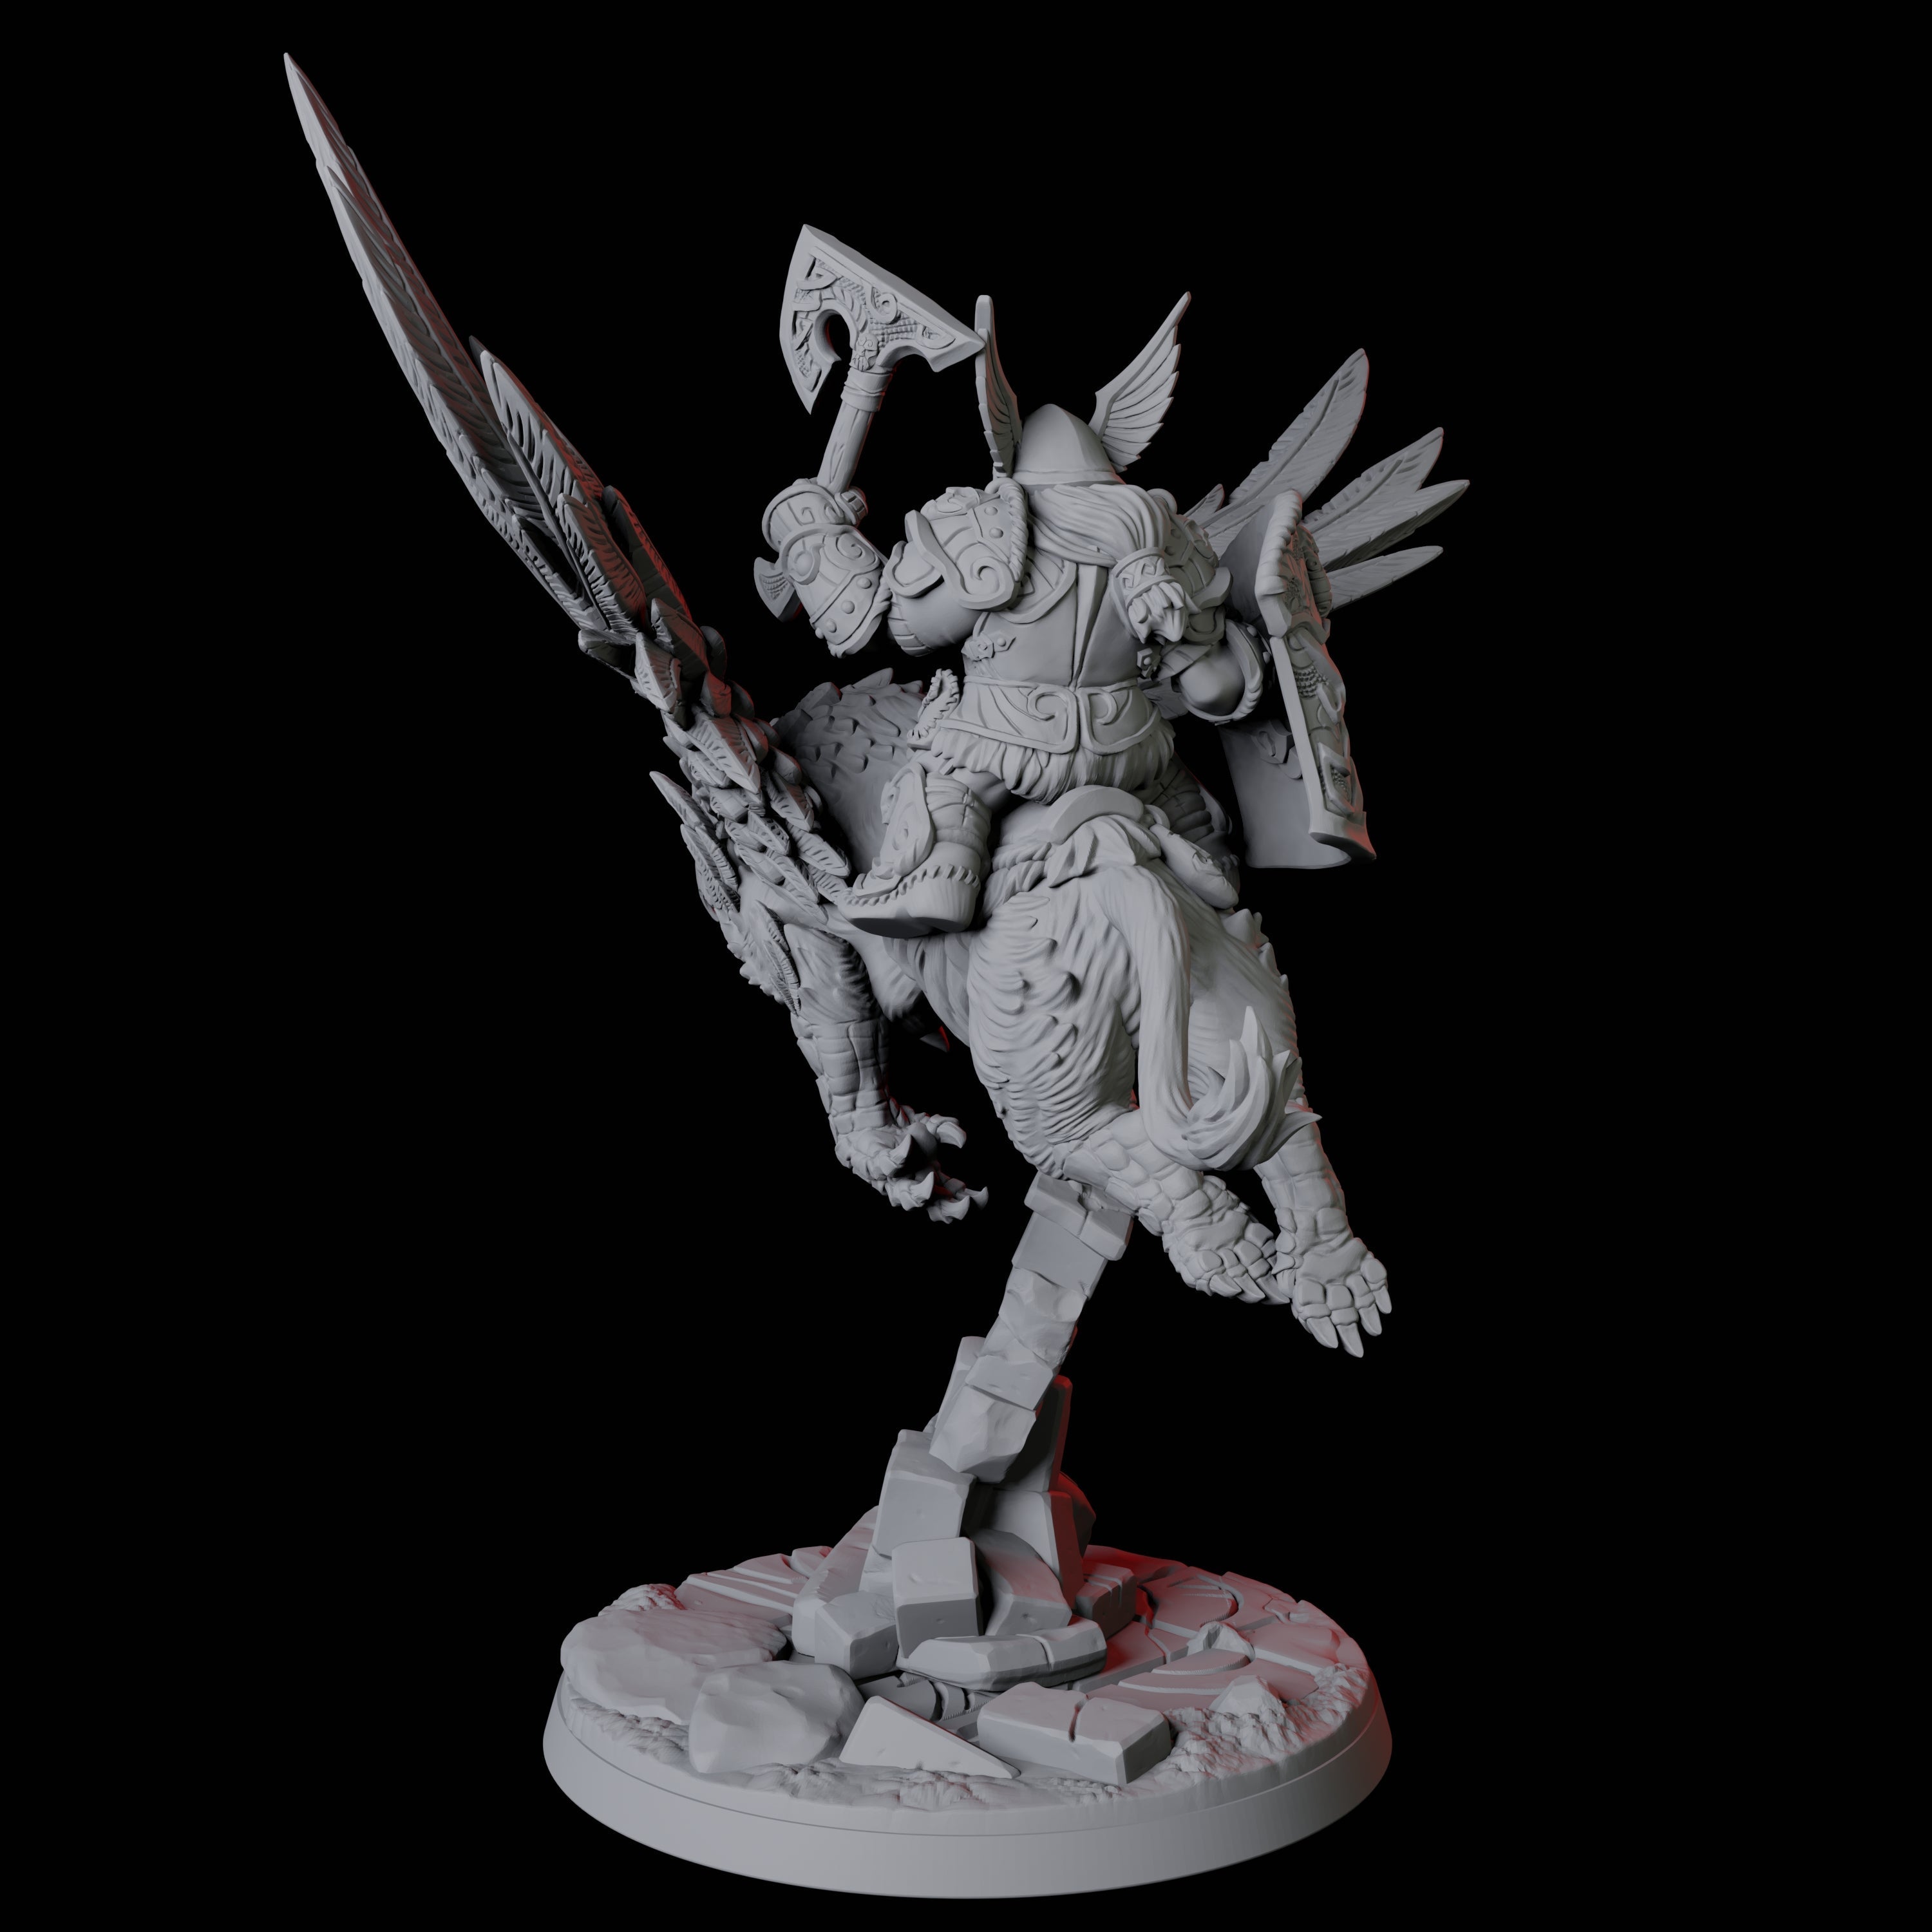 Dwarf Sky Cavalry C Miniature for Dungeons and Dragons, Pathfinder or other TTRPGs